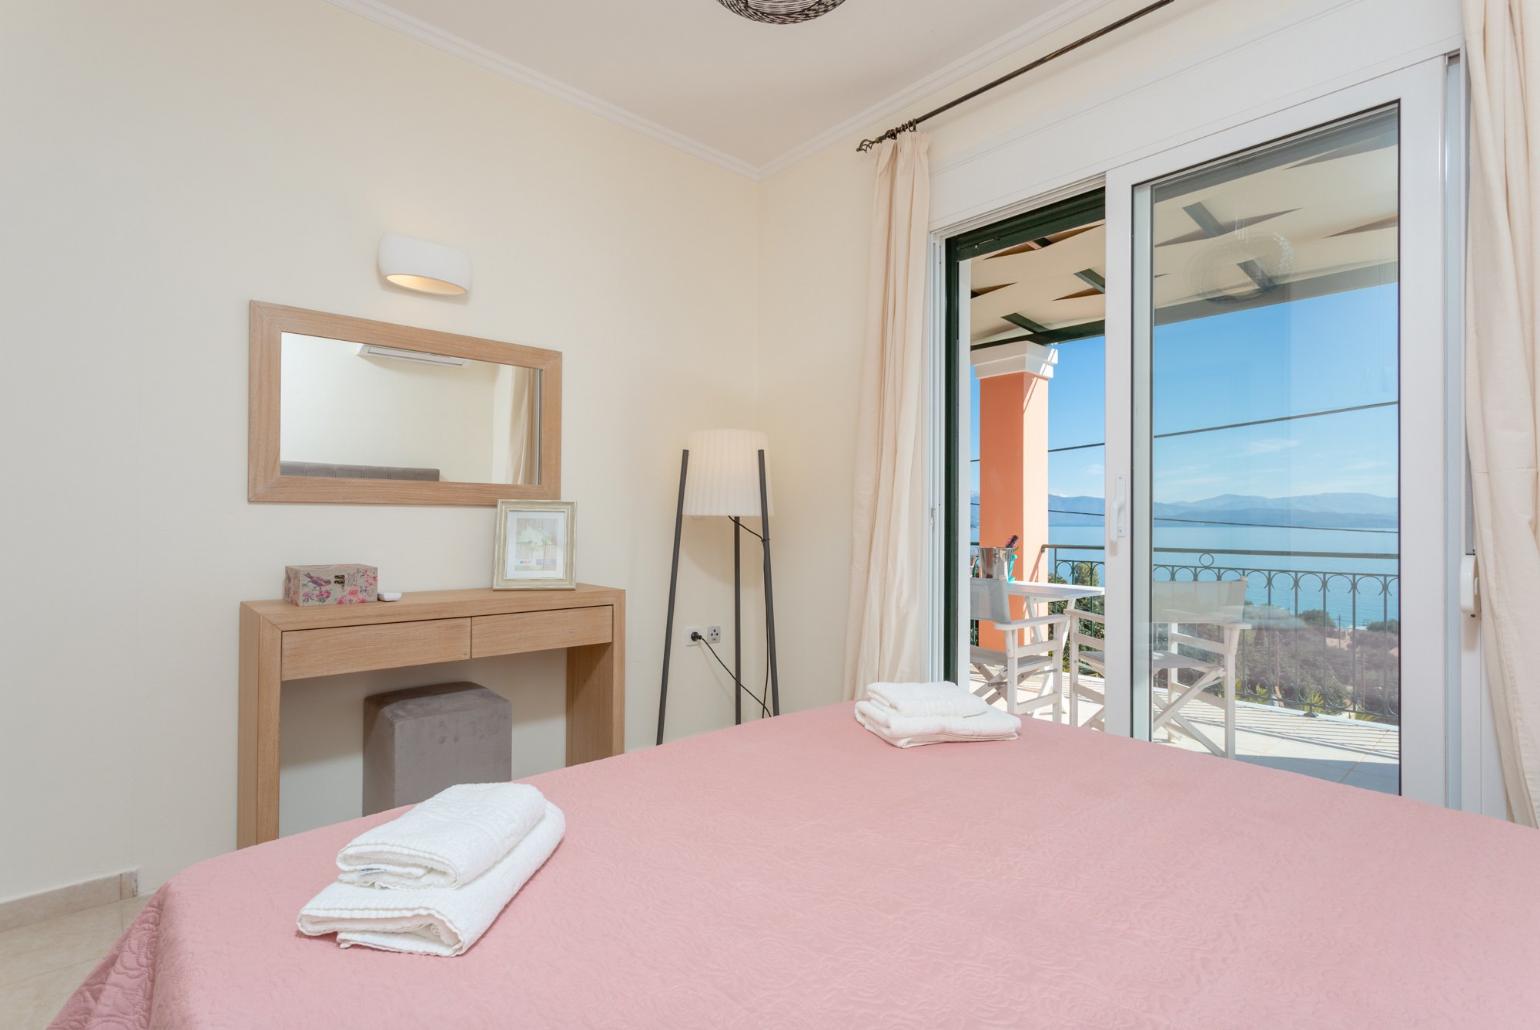 Double bedroom with A/C and terrace access with panoramic sea views